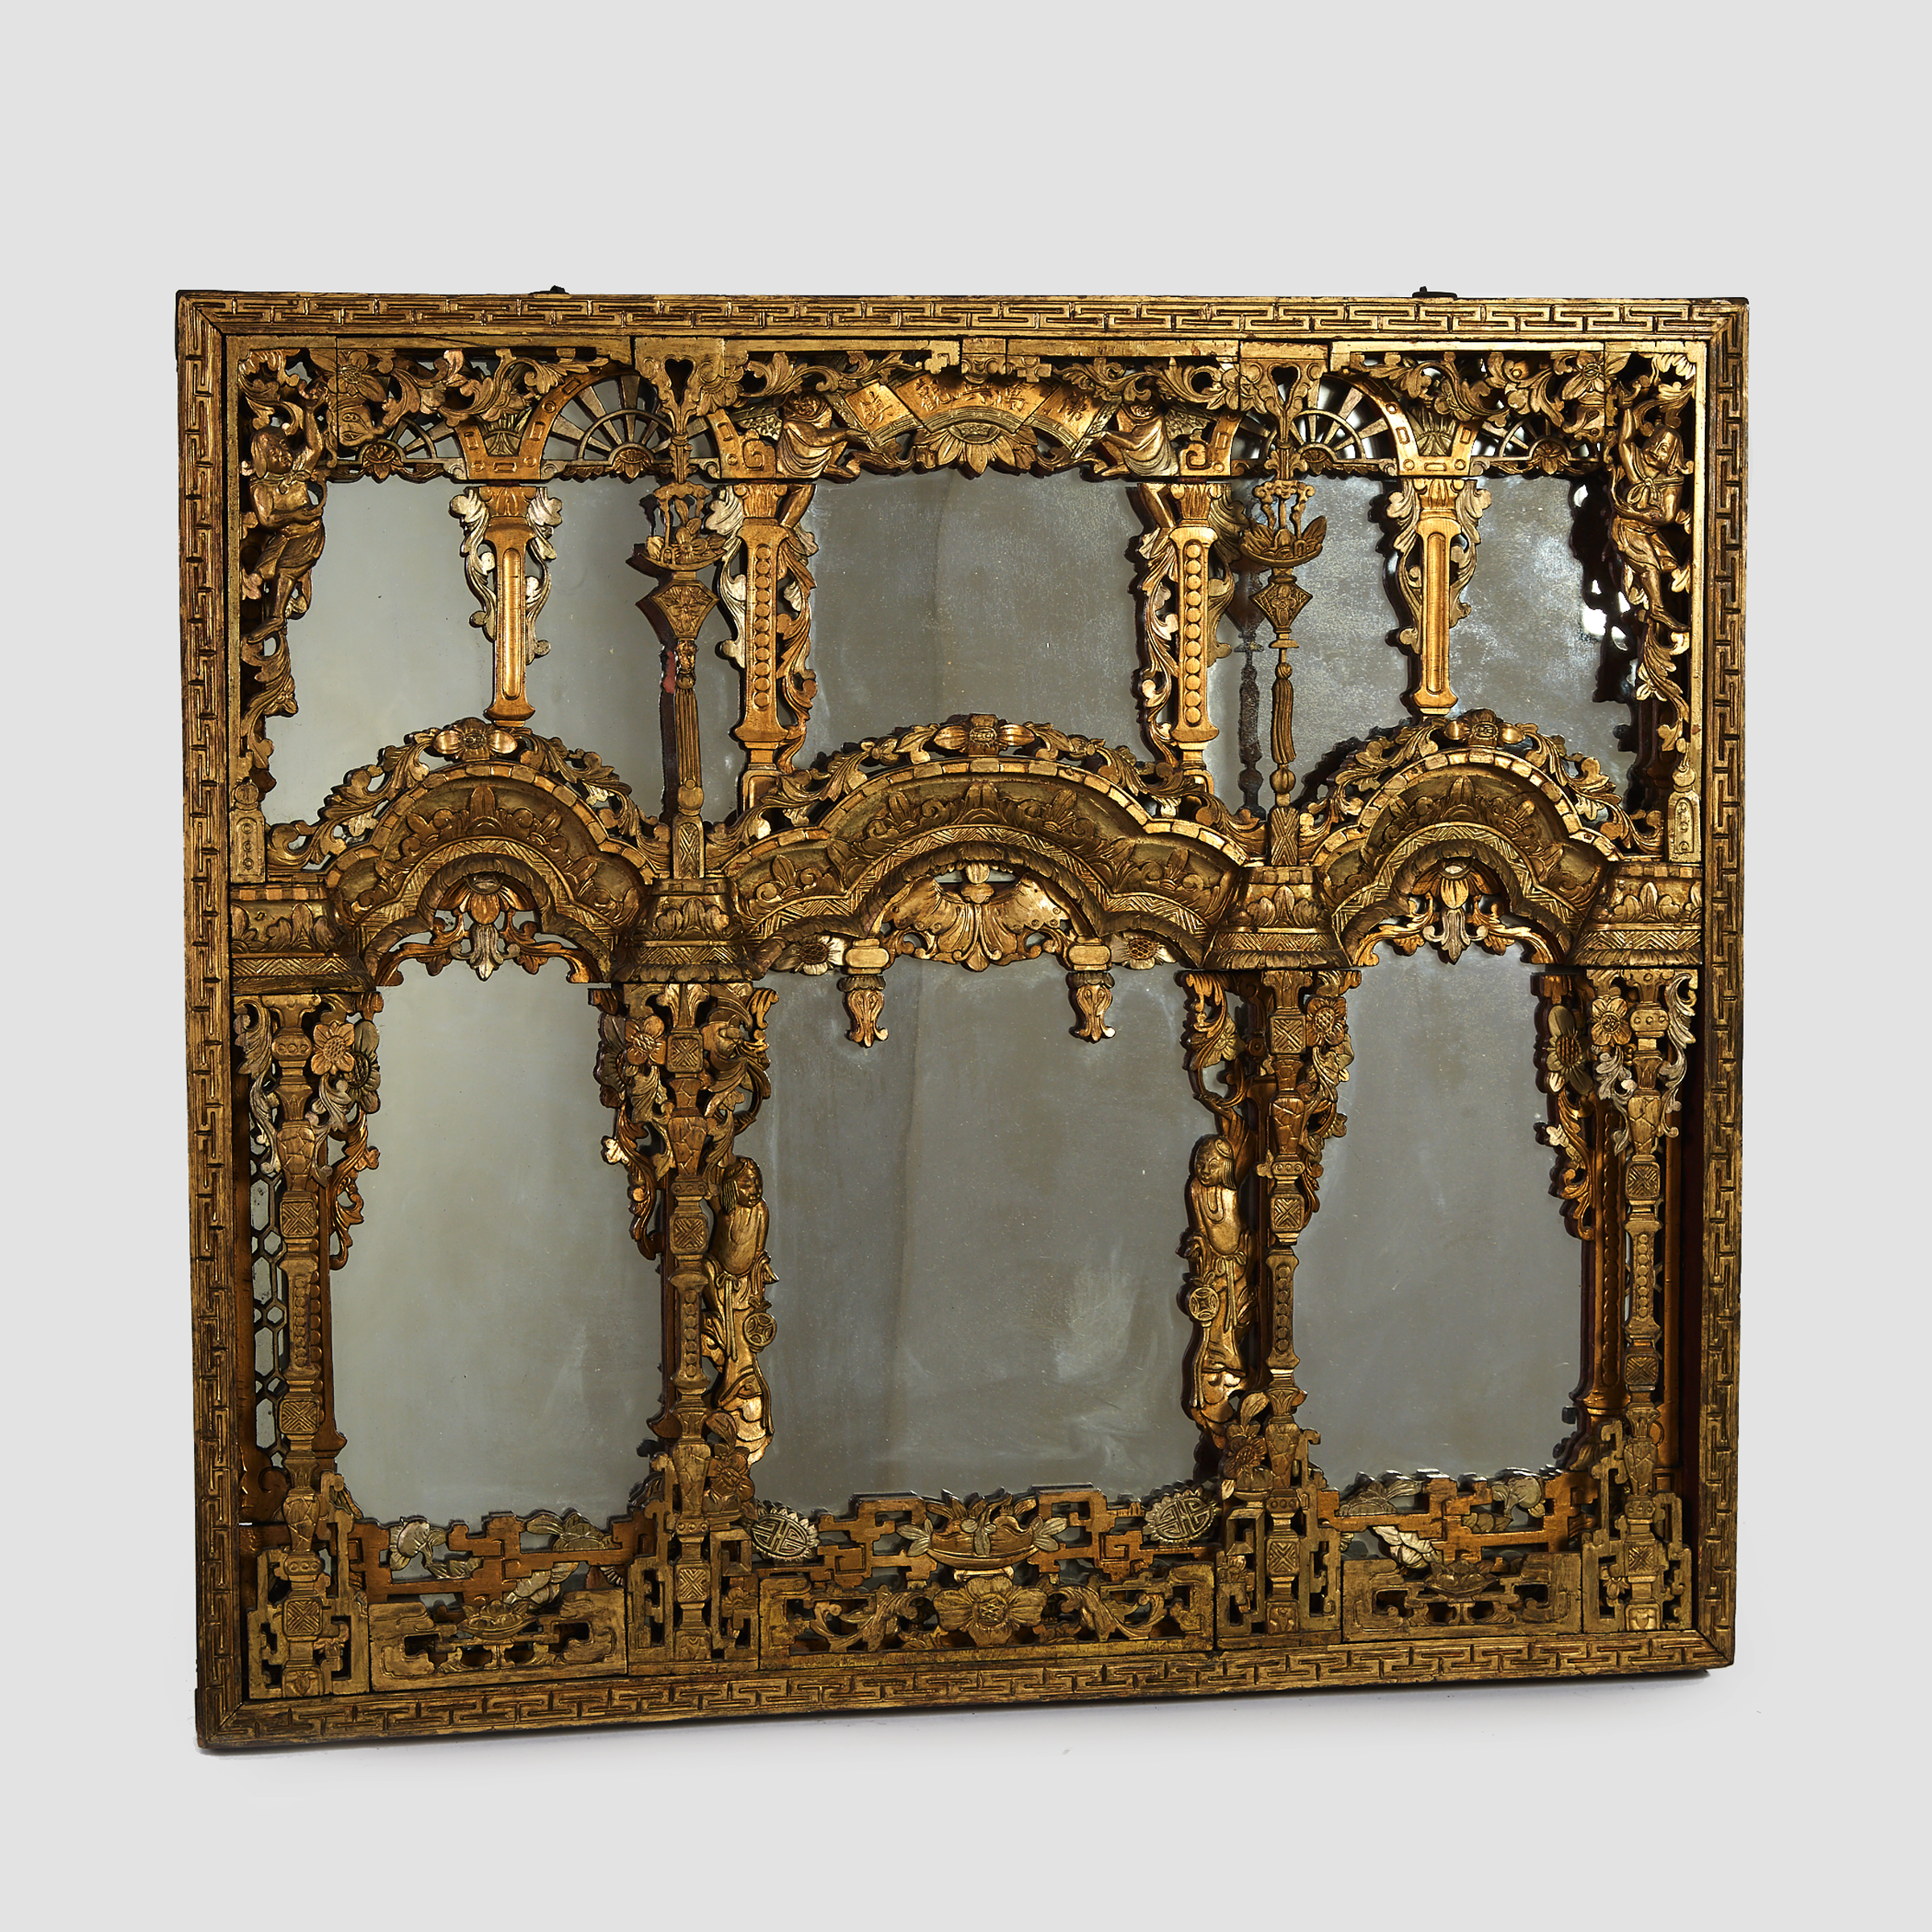 A Chinese Gilt Wood Temple Carving Framed Mirror